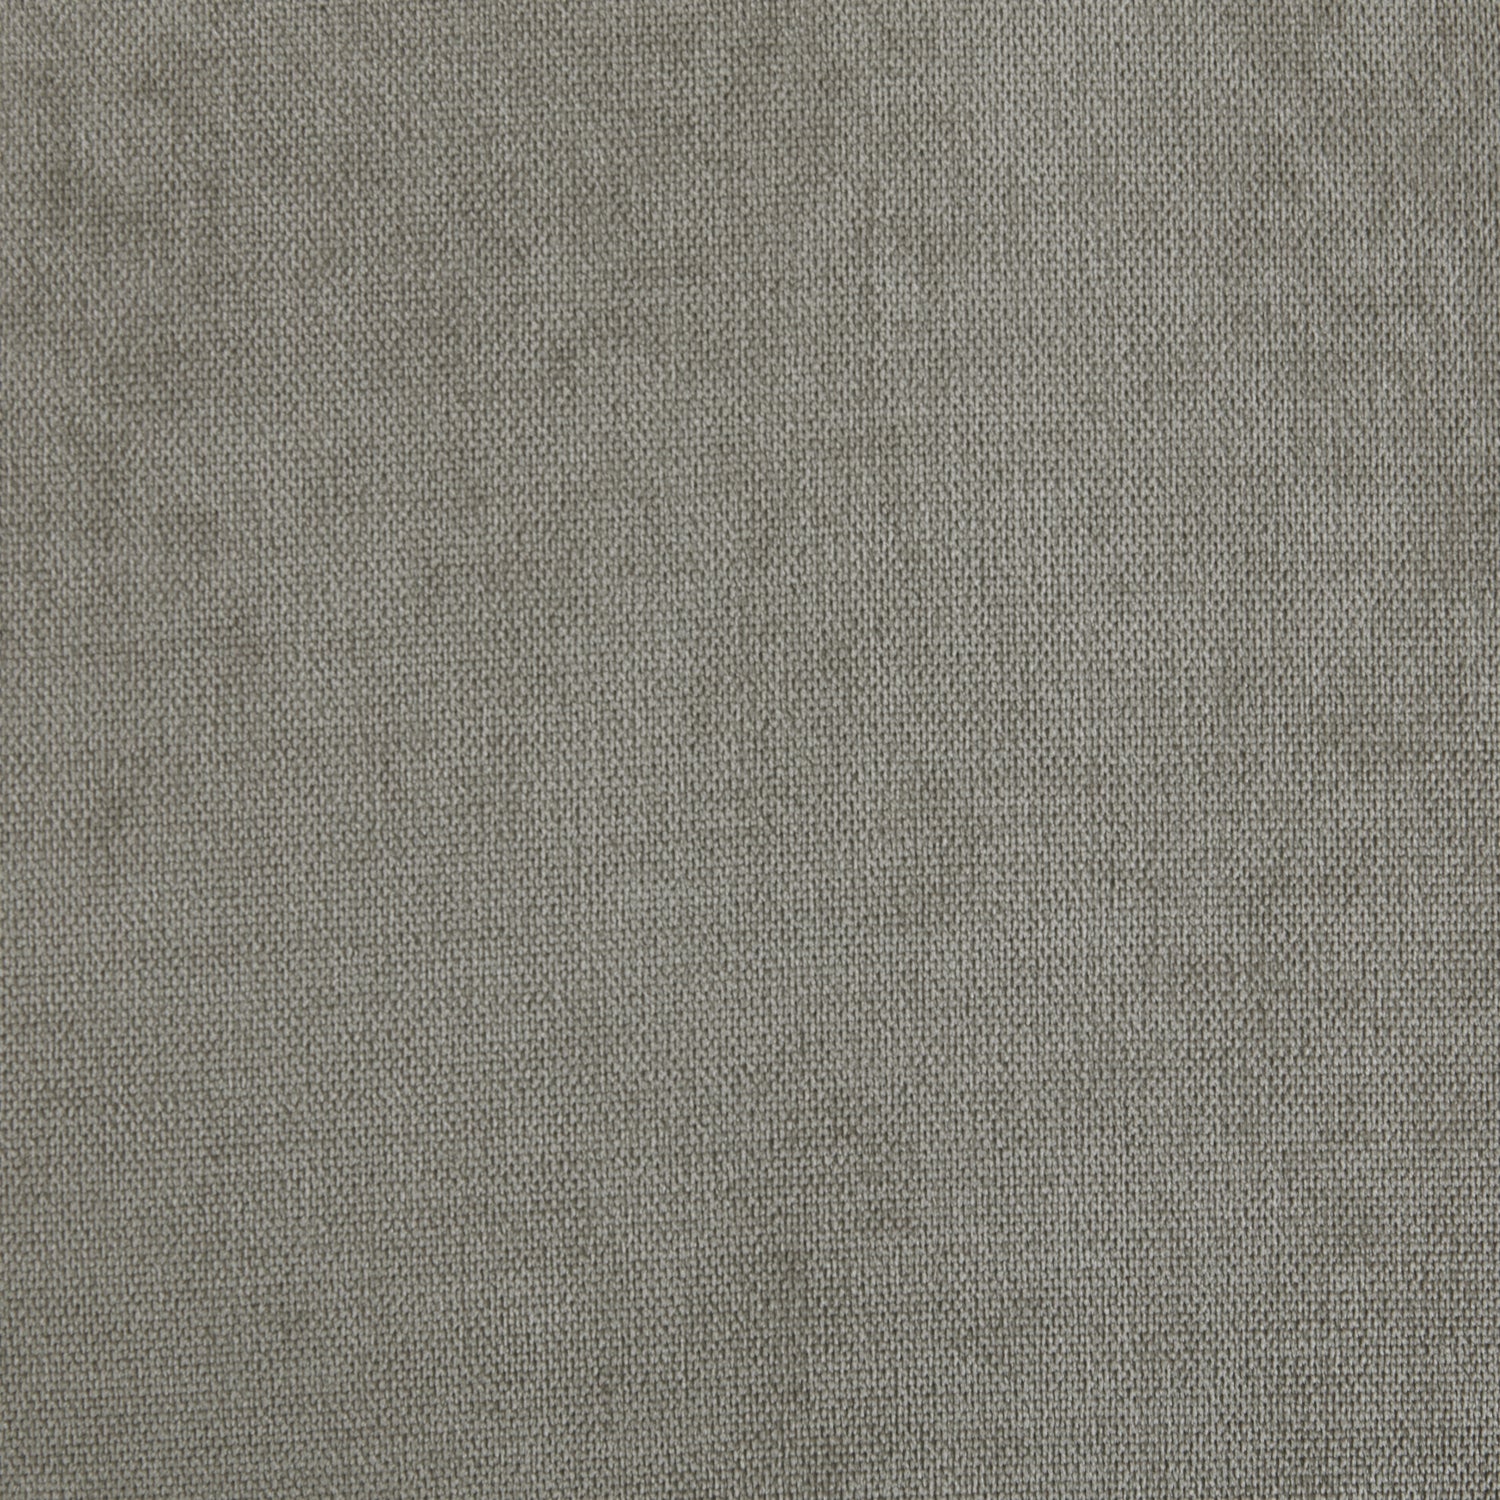 Fabric Swatches Seawall Grey